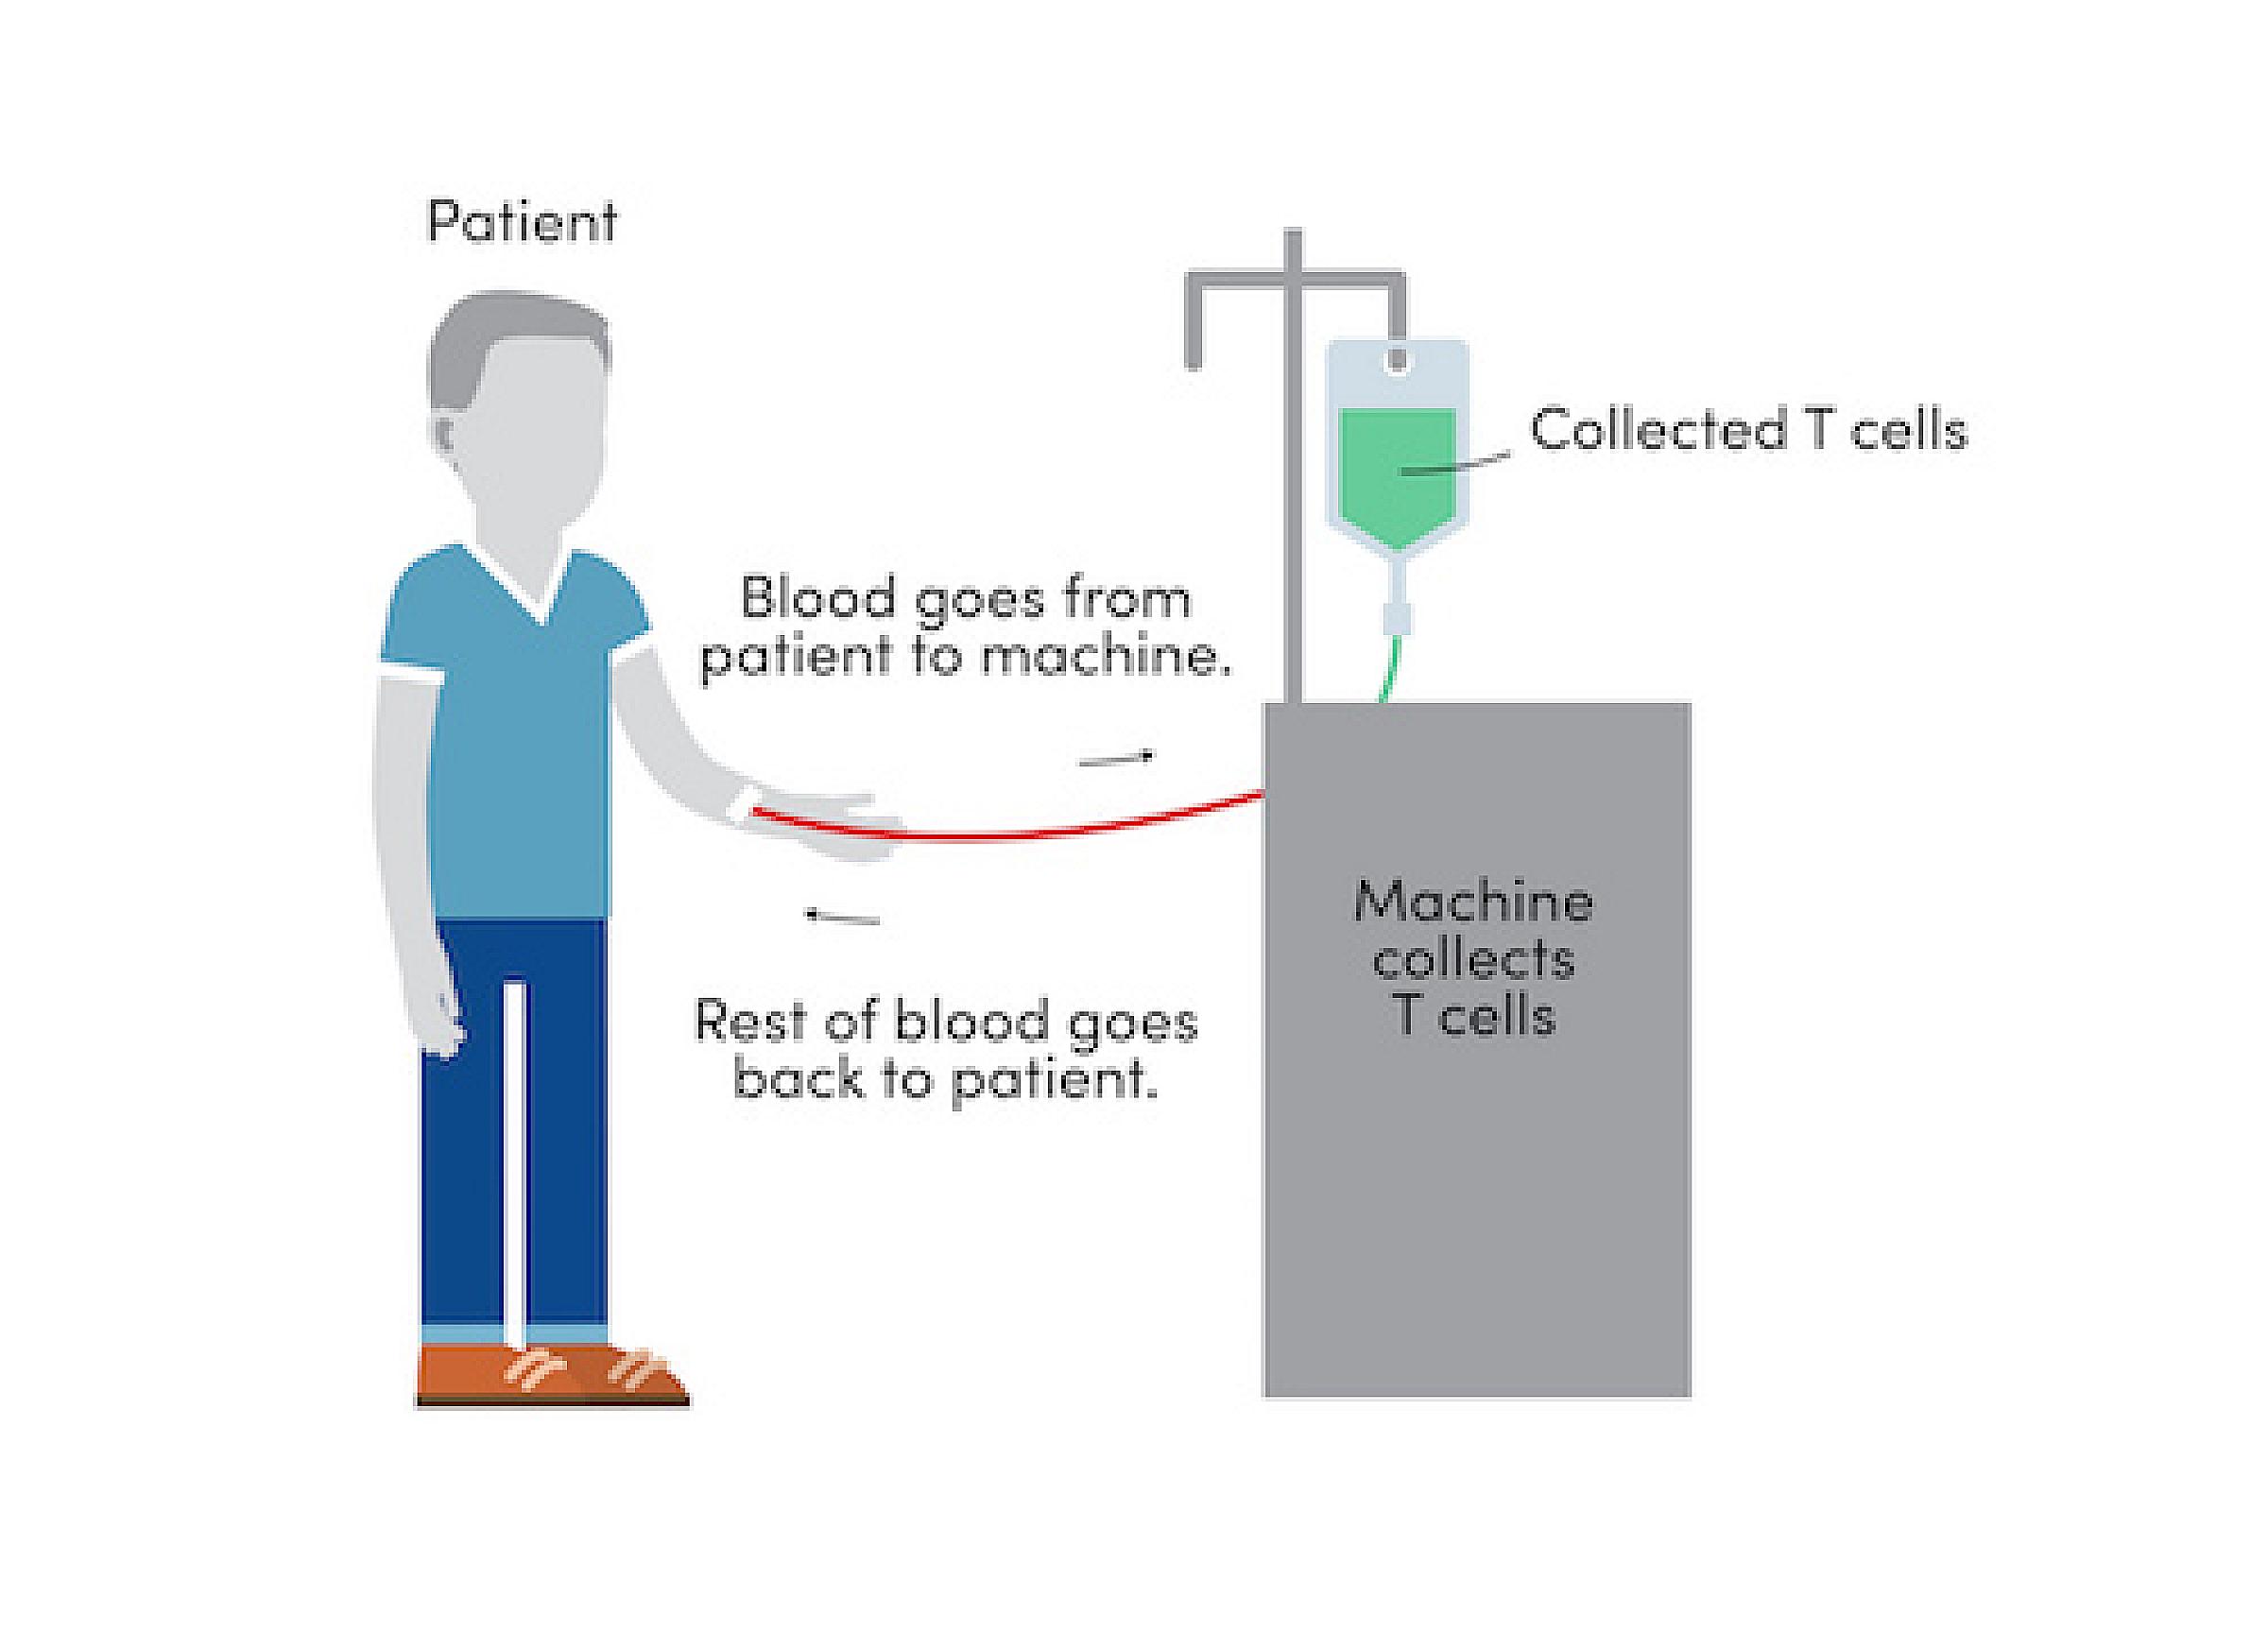 Graphic showing blood going from patient to machine where T cells are collected and the rest of the blood goes back to the patient